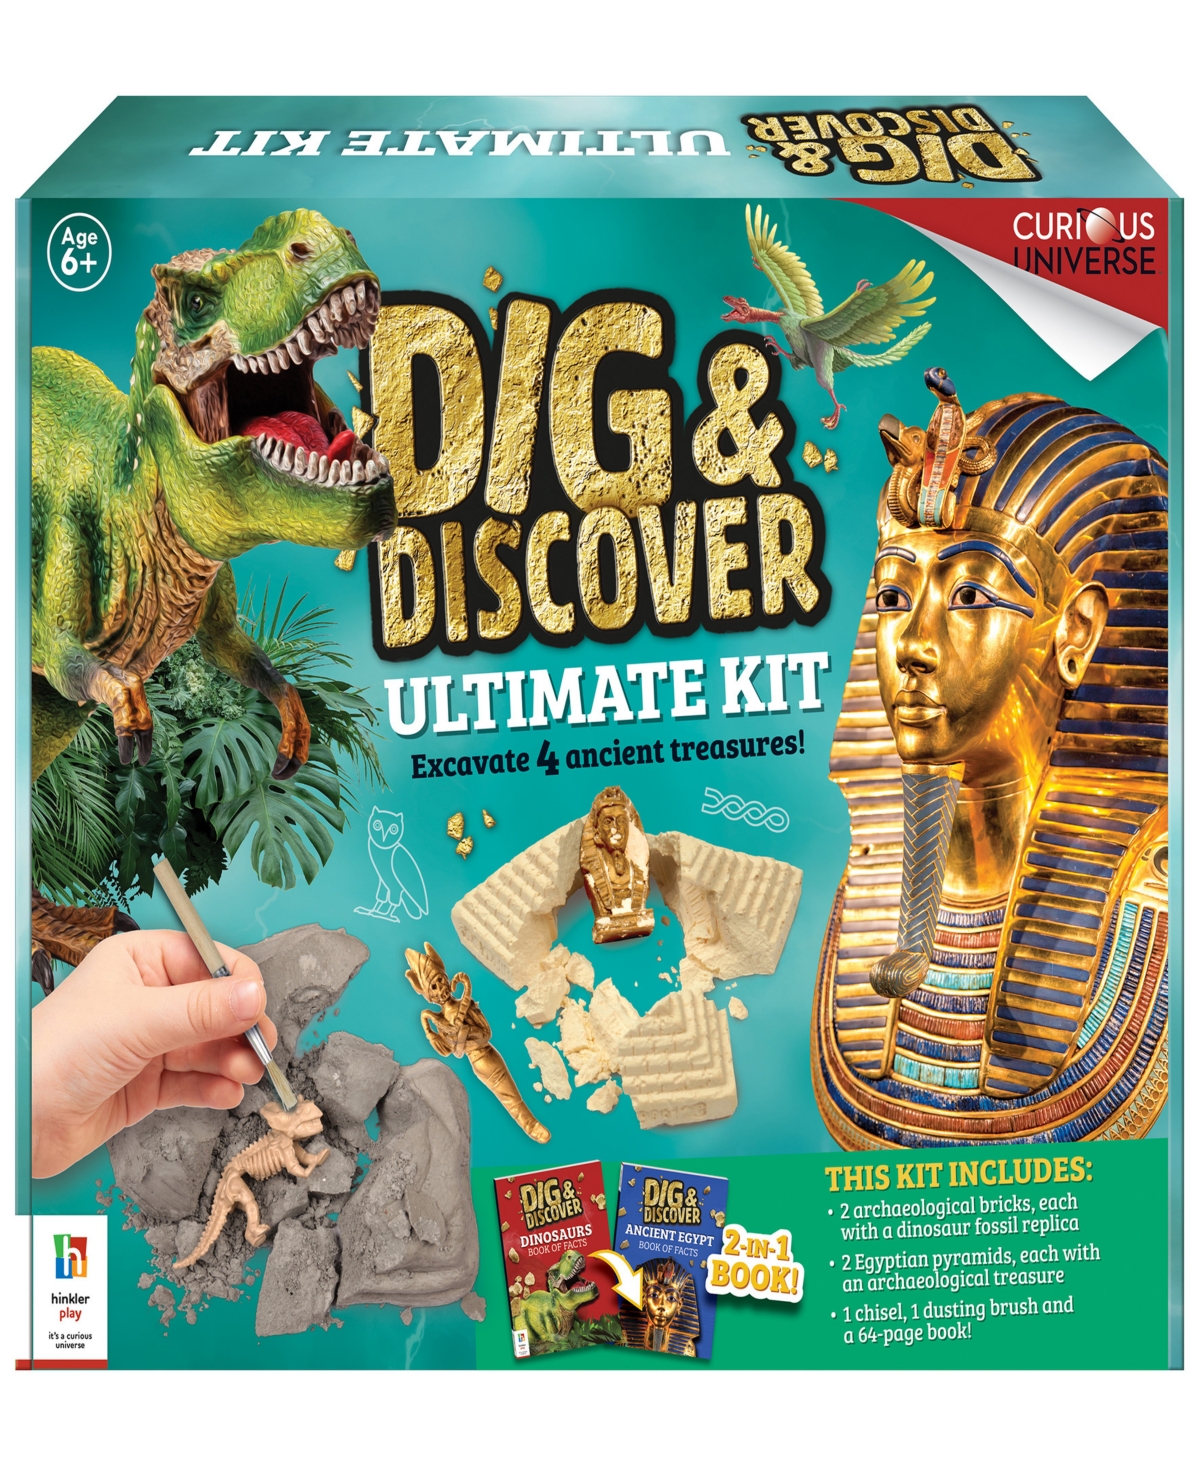 Curious Universe Dig Discover Ultimate Kit Diy Science And Geology For Kids, Dinosaurs Ancient Egypt In Multi